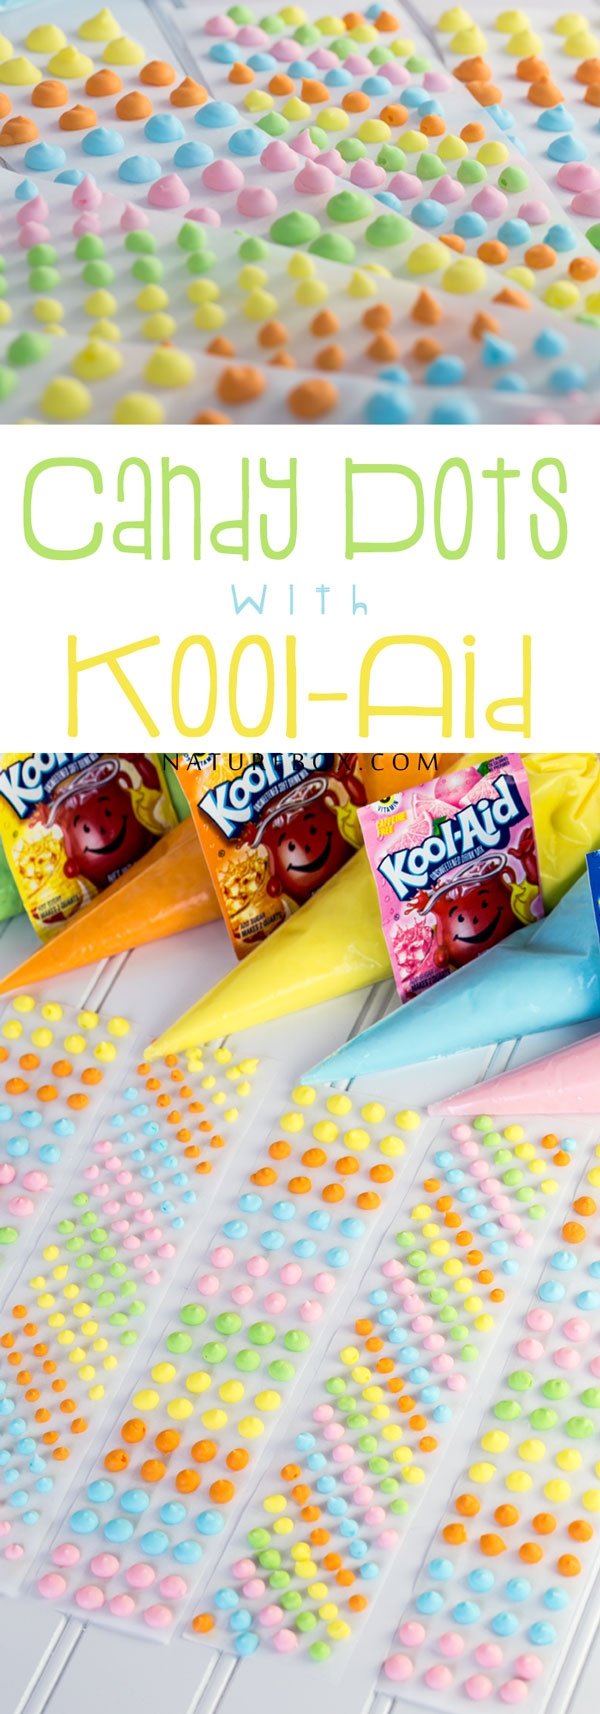 Candy-Dots-With-Kool-Aid-Graphic